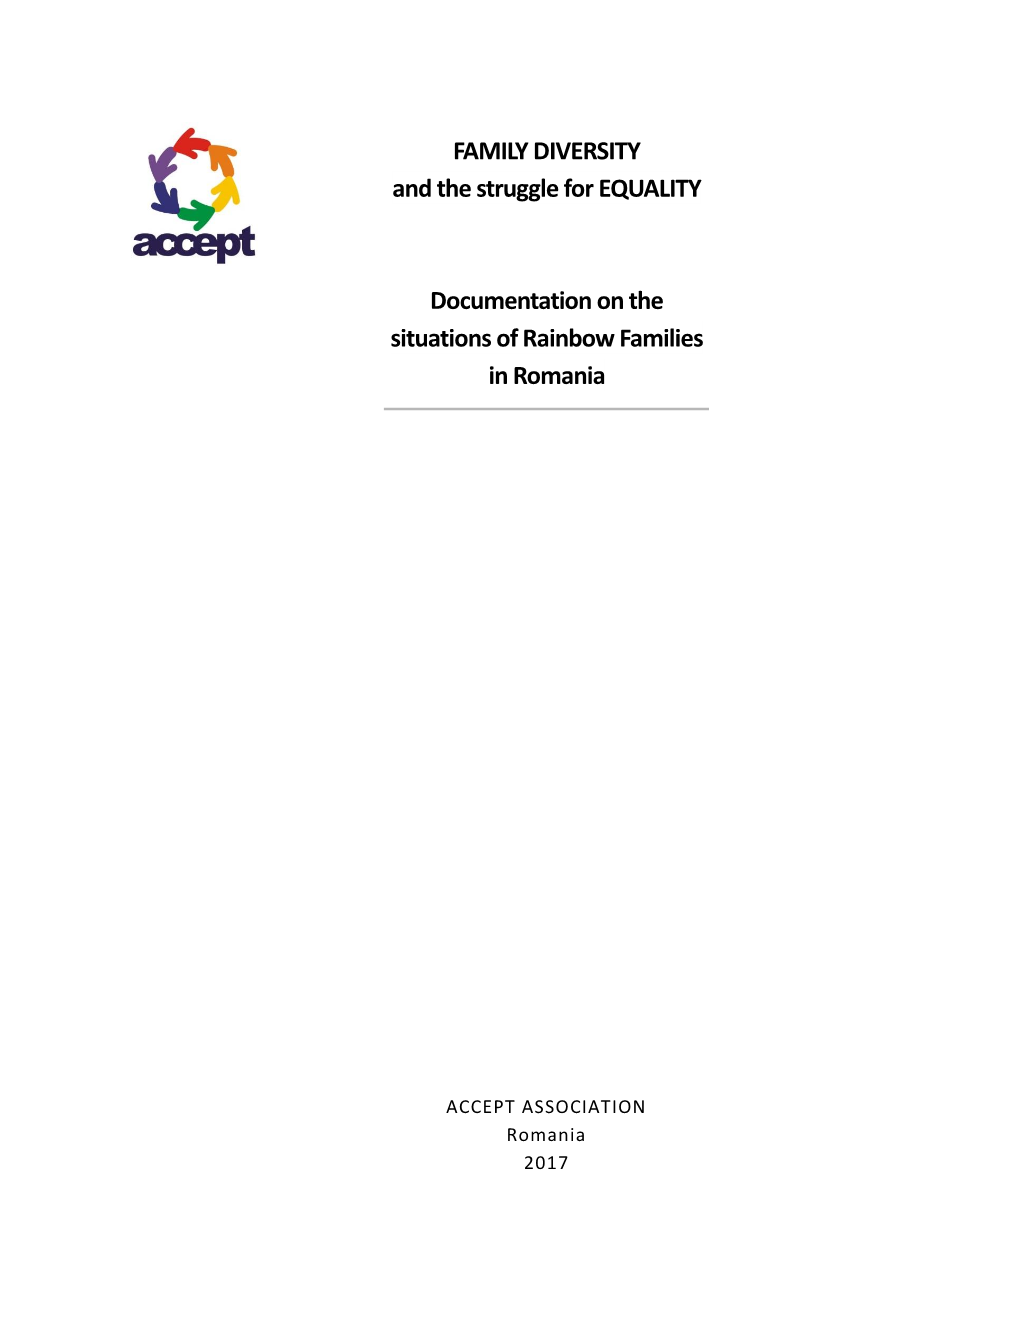 FAMILY DIVERSITY and the Struggle for EQUALITY Documentation on the Situations of Rainbow Families in Romania